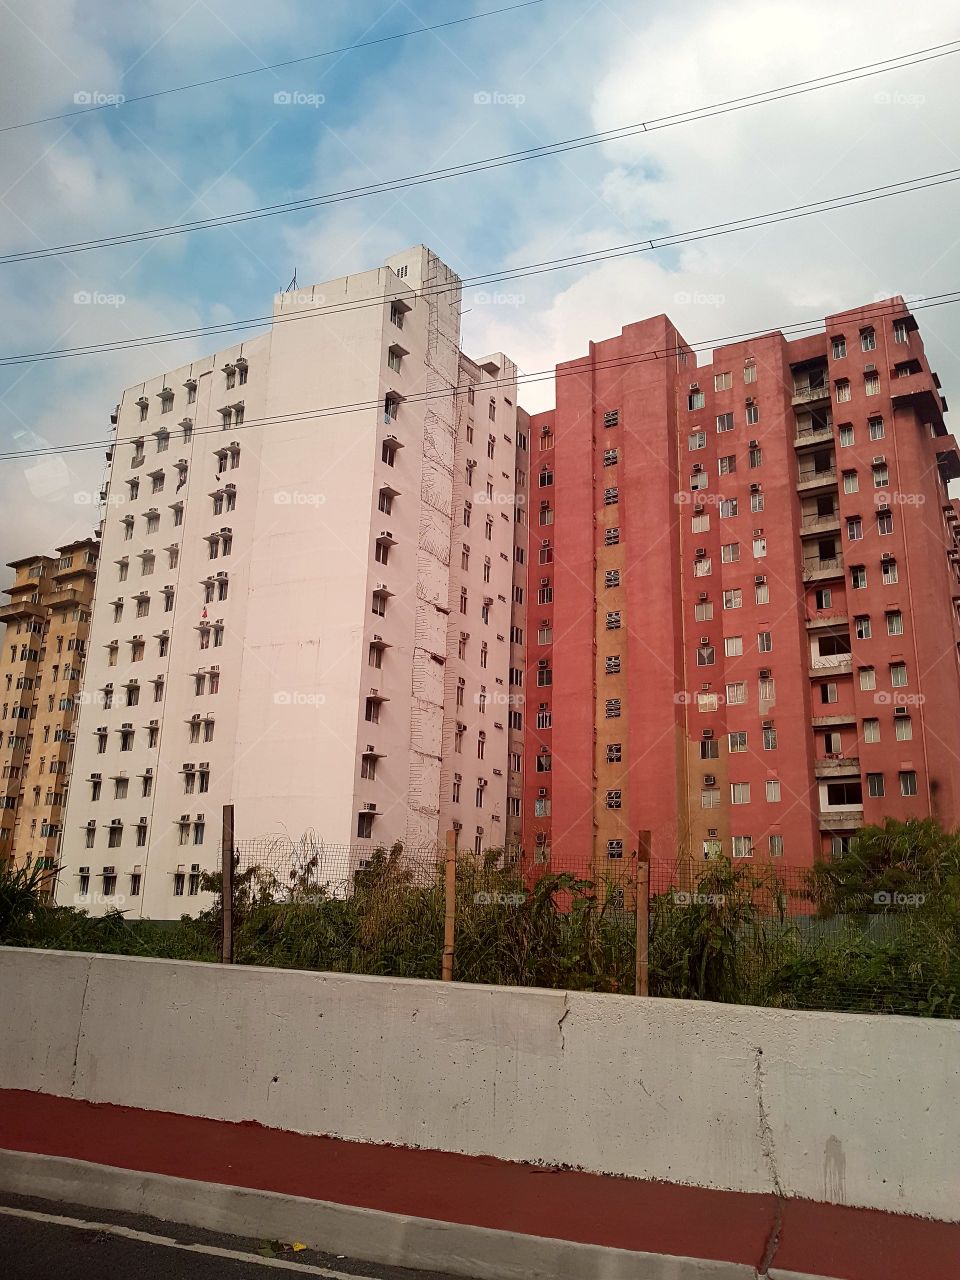 Ugly apartment buildings in the Philippines